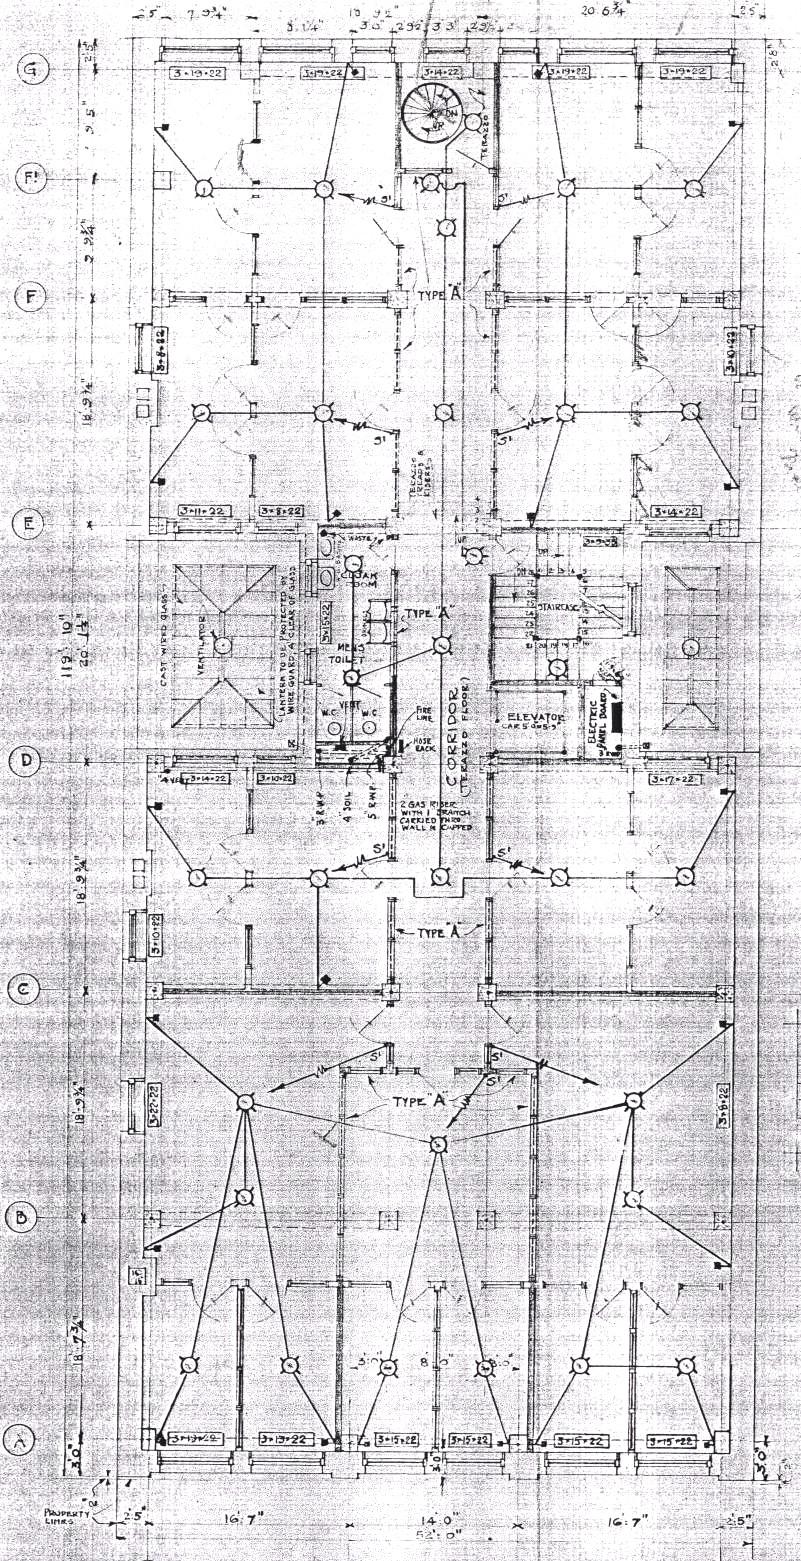 Plate 27 Architect s Plans, First Floor Plan, dated May 14, 1914.